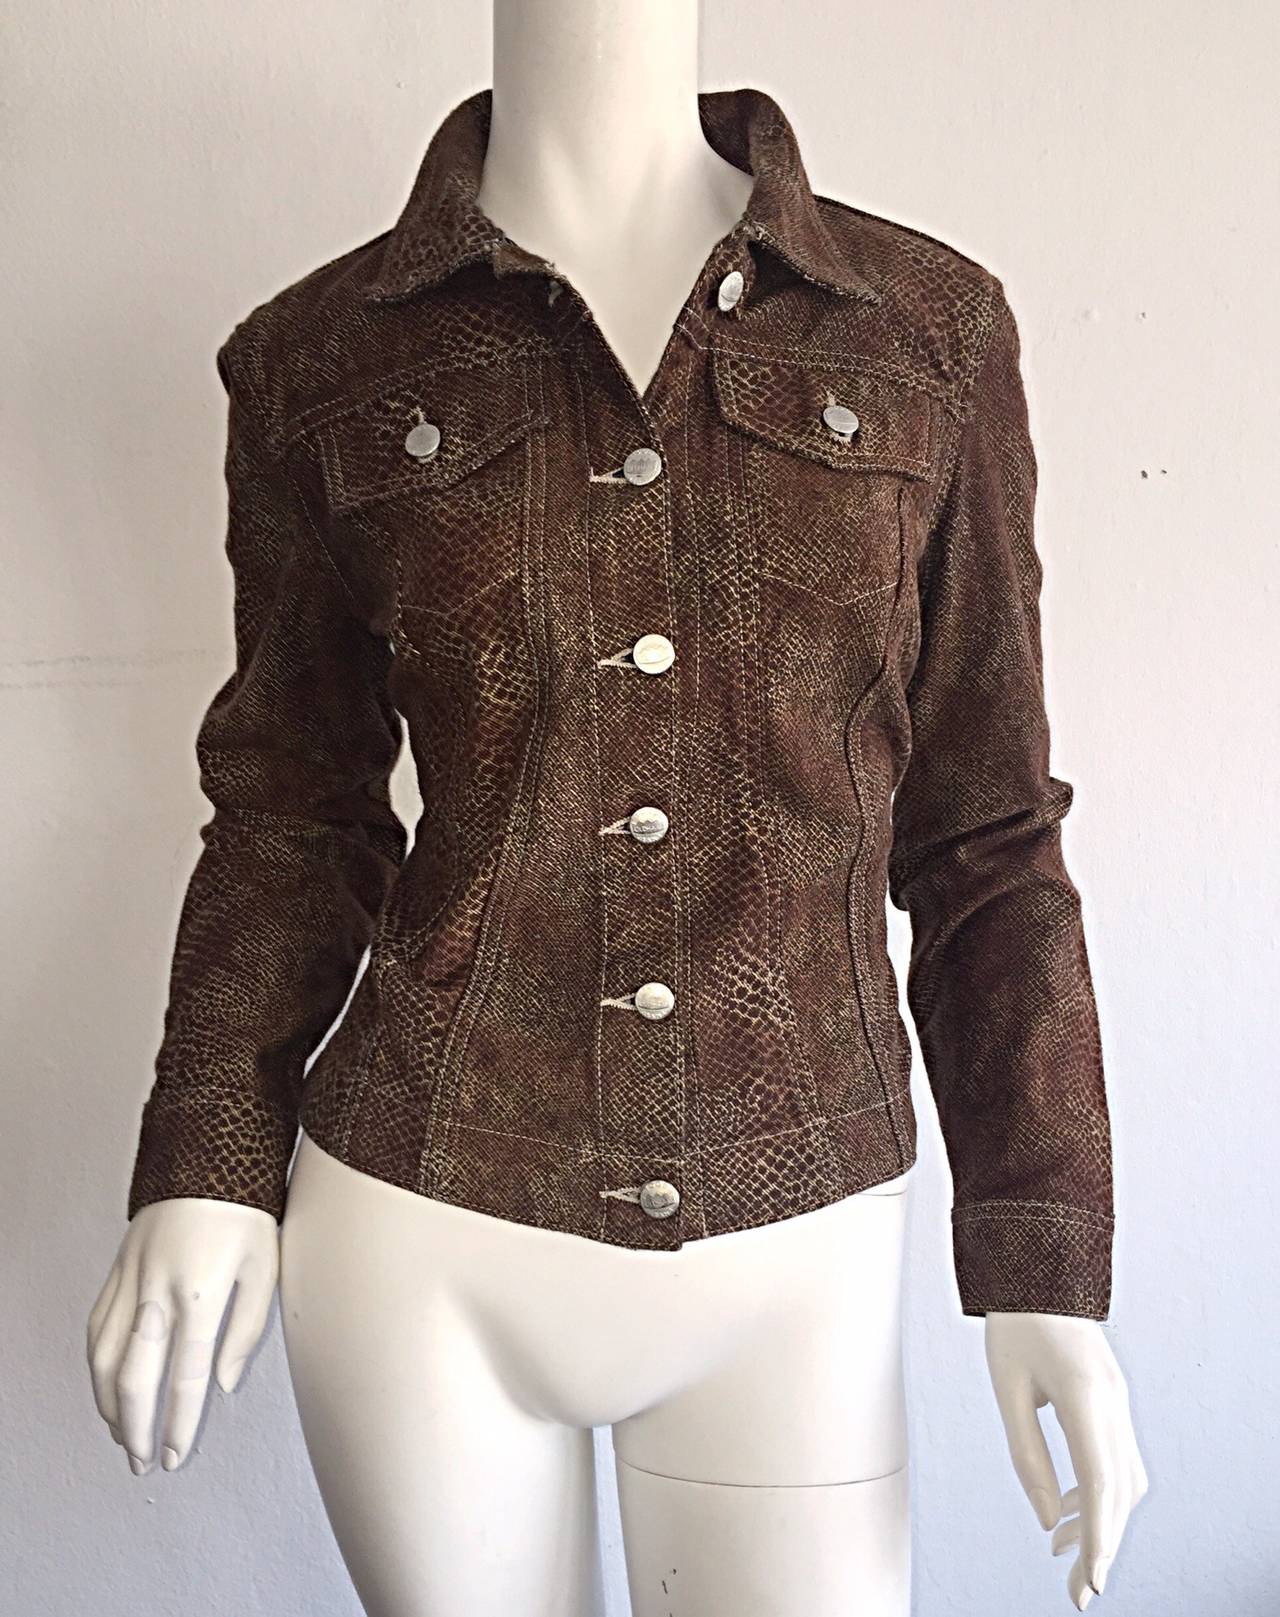 Amazing 1990s Todd Oldham snakeskin print denim jacket! Classic snakeskin print in brown and black, with signature silver buttons down the front, at cuffs, pockets and at adjusting back waist. Can easily be worn a number of ways--Goes with